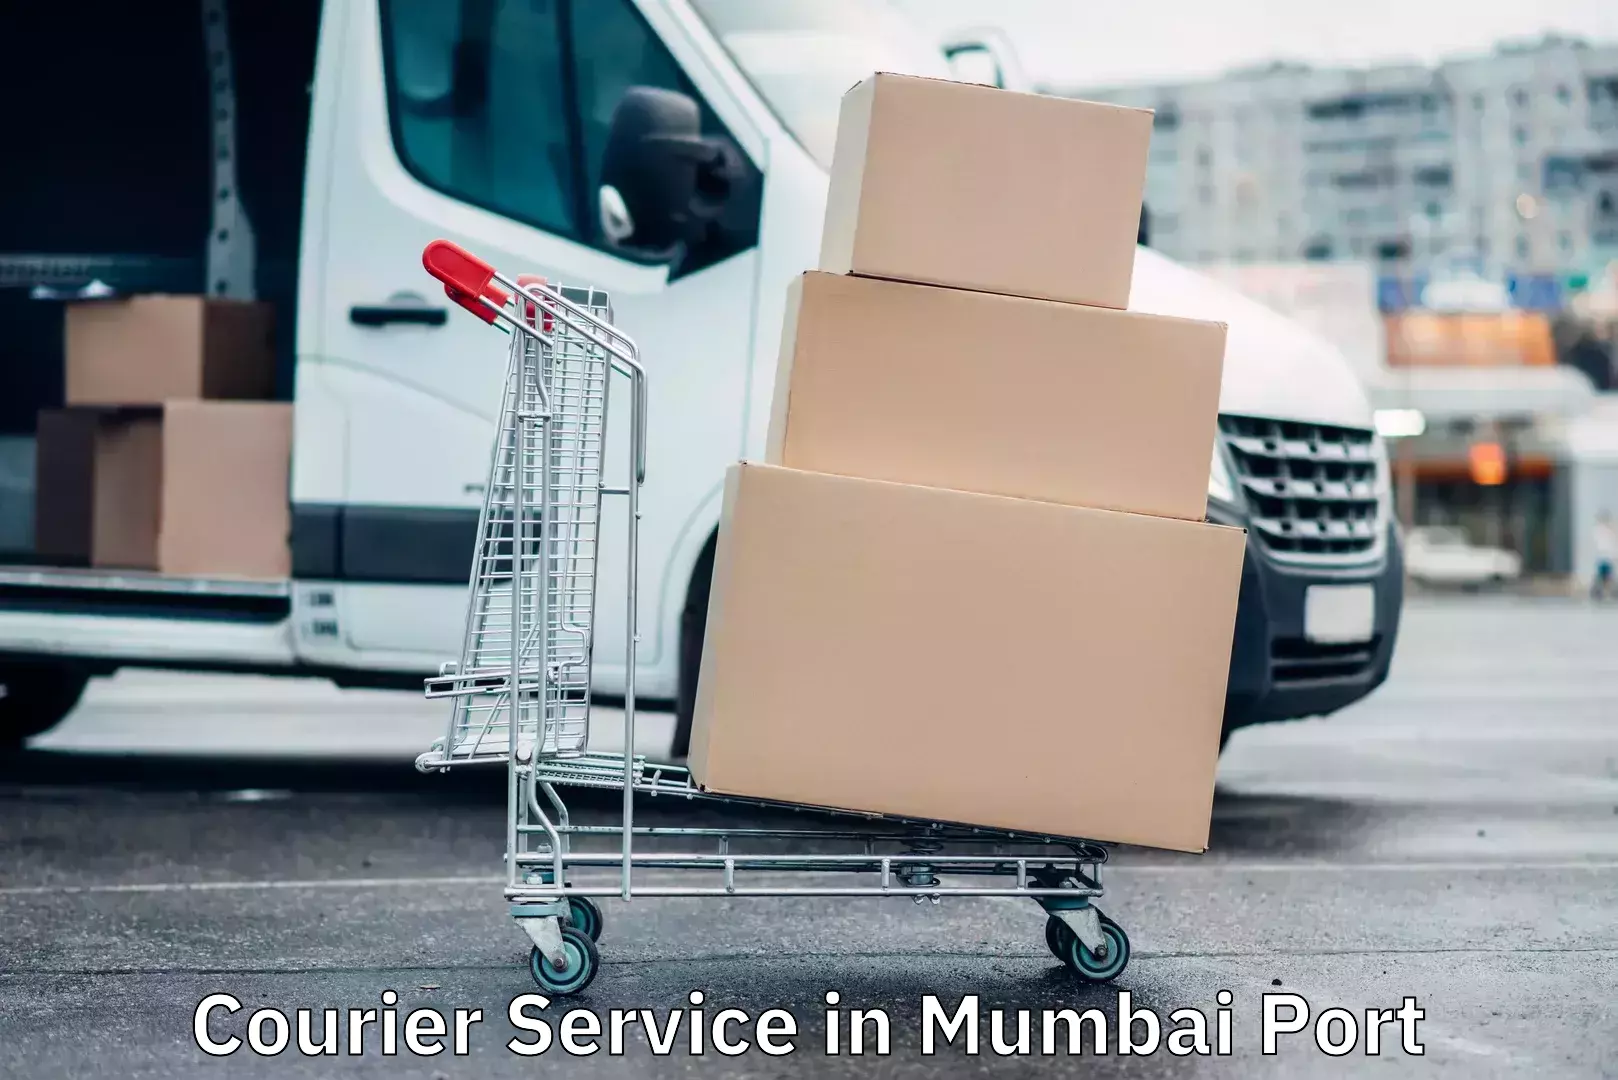 Fast delivery service in Mumbai Port